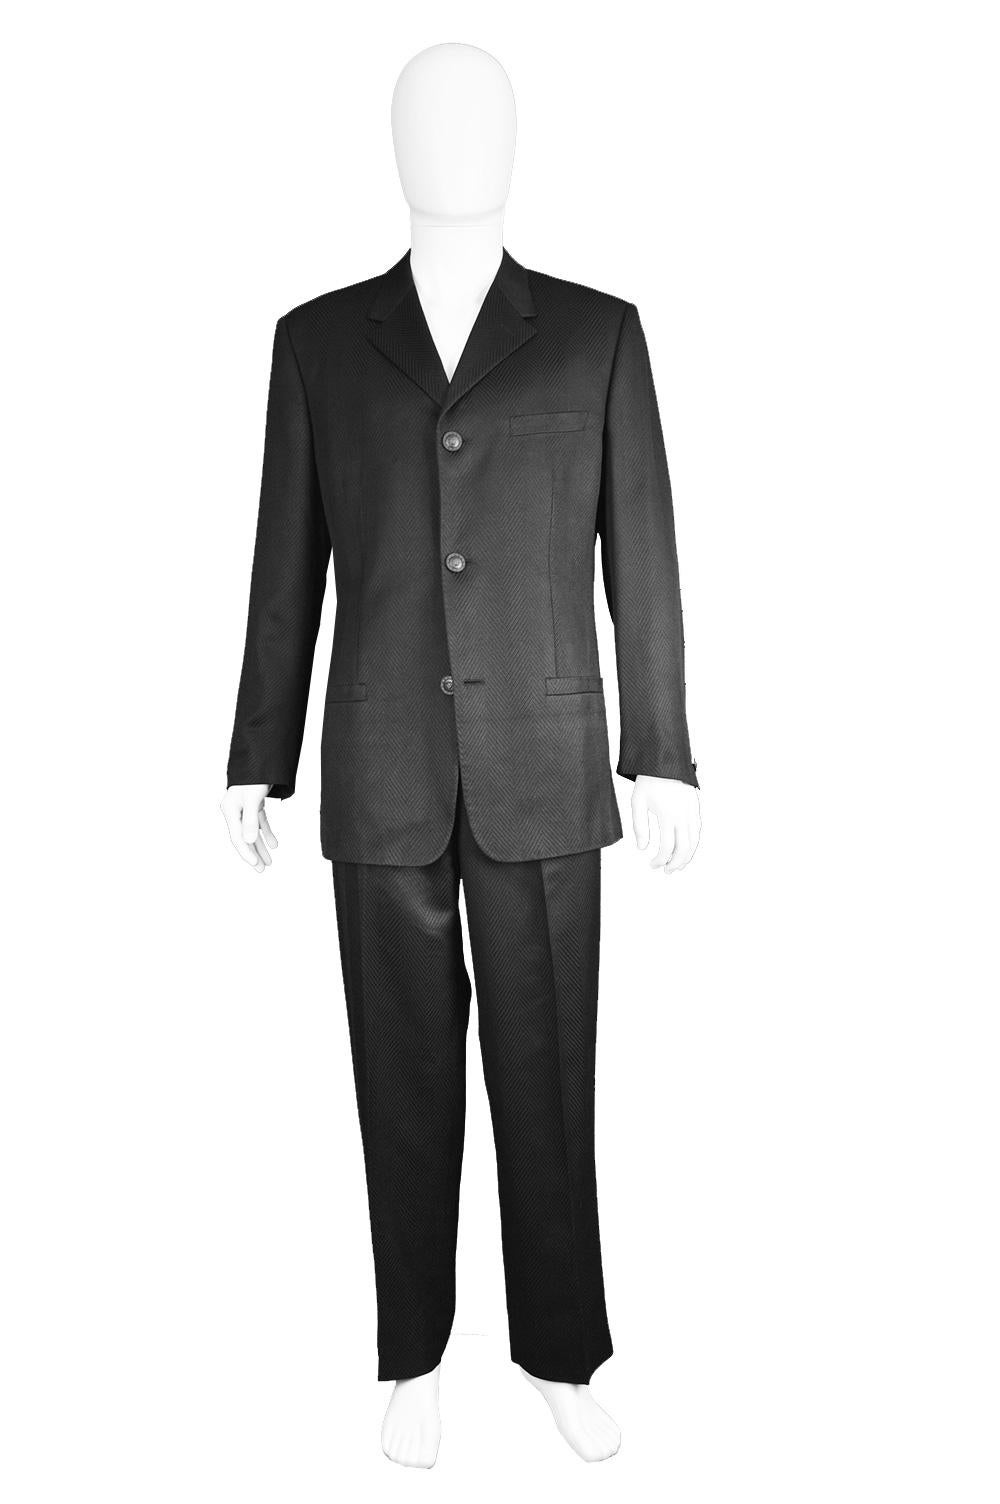 Gianni Versace Men's Black 100% Silk Jacquard 2 Piece Vintage Suit, 1990s

Click 'Continue Reading' below to see size & description. 

A stylish and classic vintage men's two piece suit from the 90s by luxury Italian fashion designer, Gianni